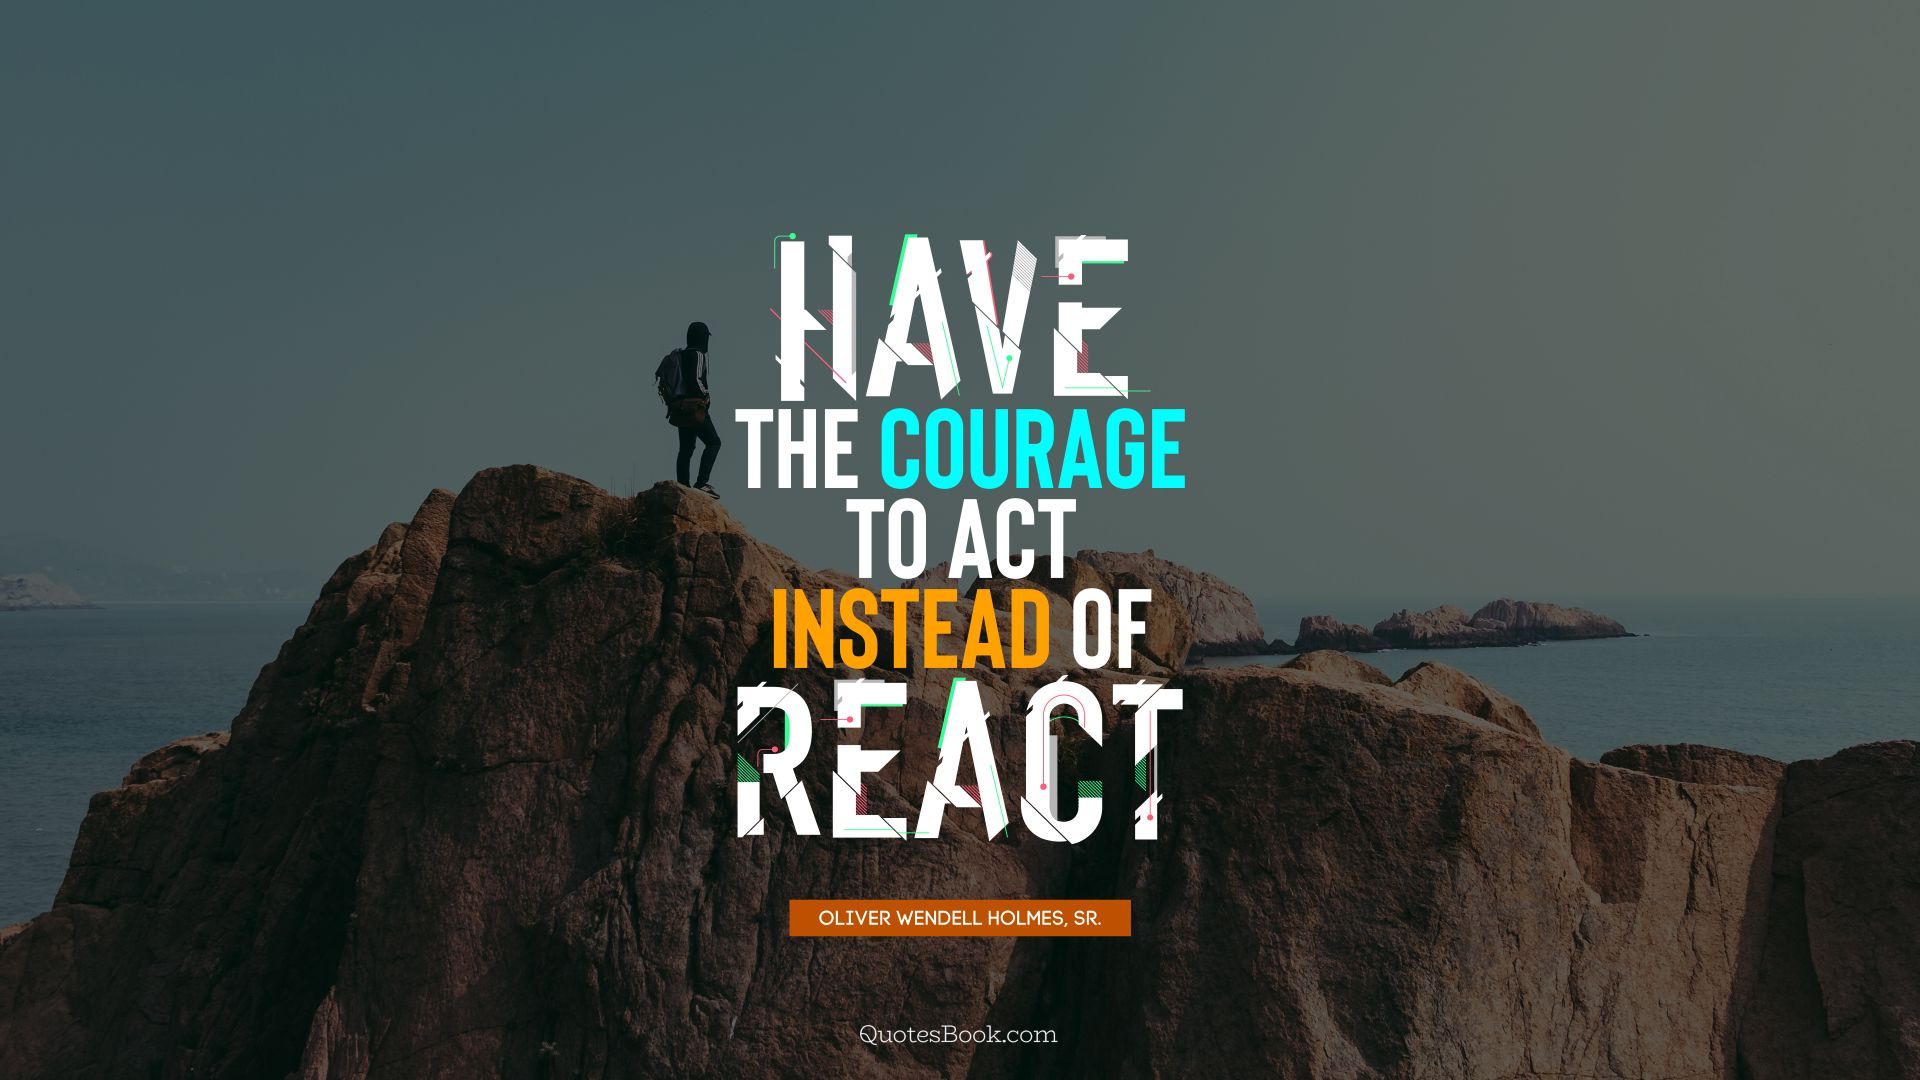 Have the courage to act instead of react. - Quote by Oliver Wendell Holmes, Sr.